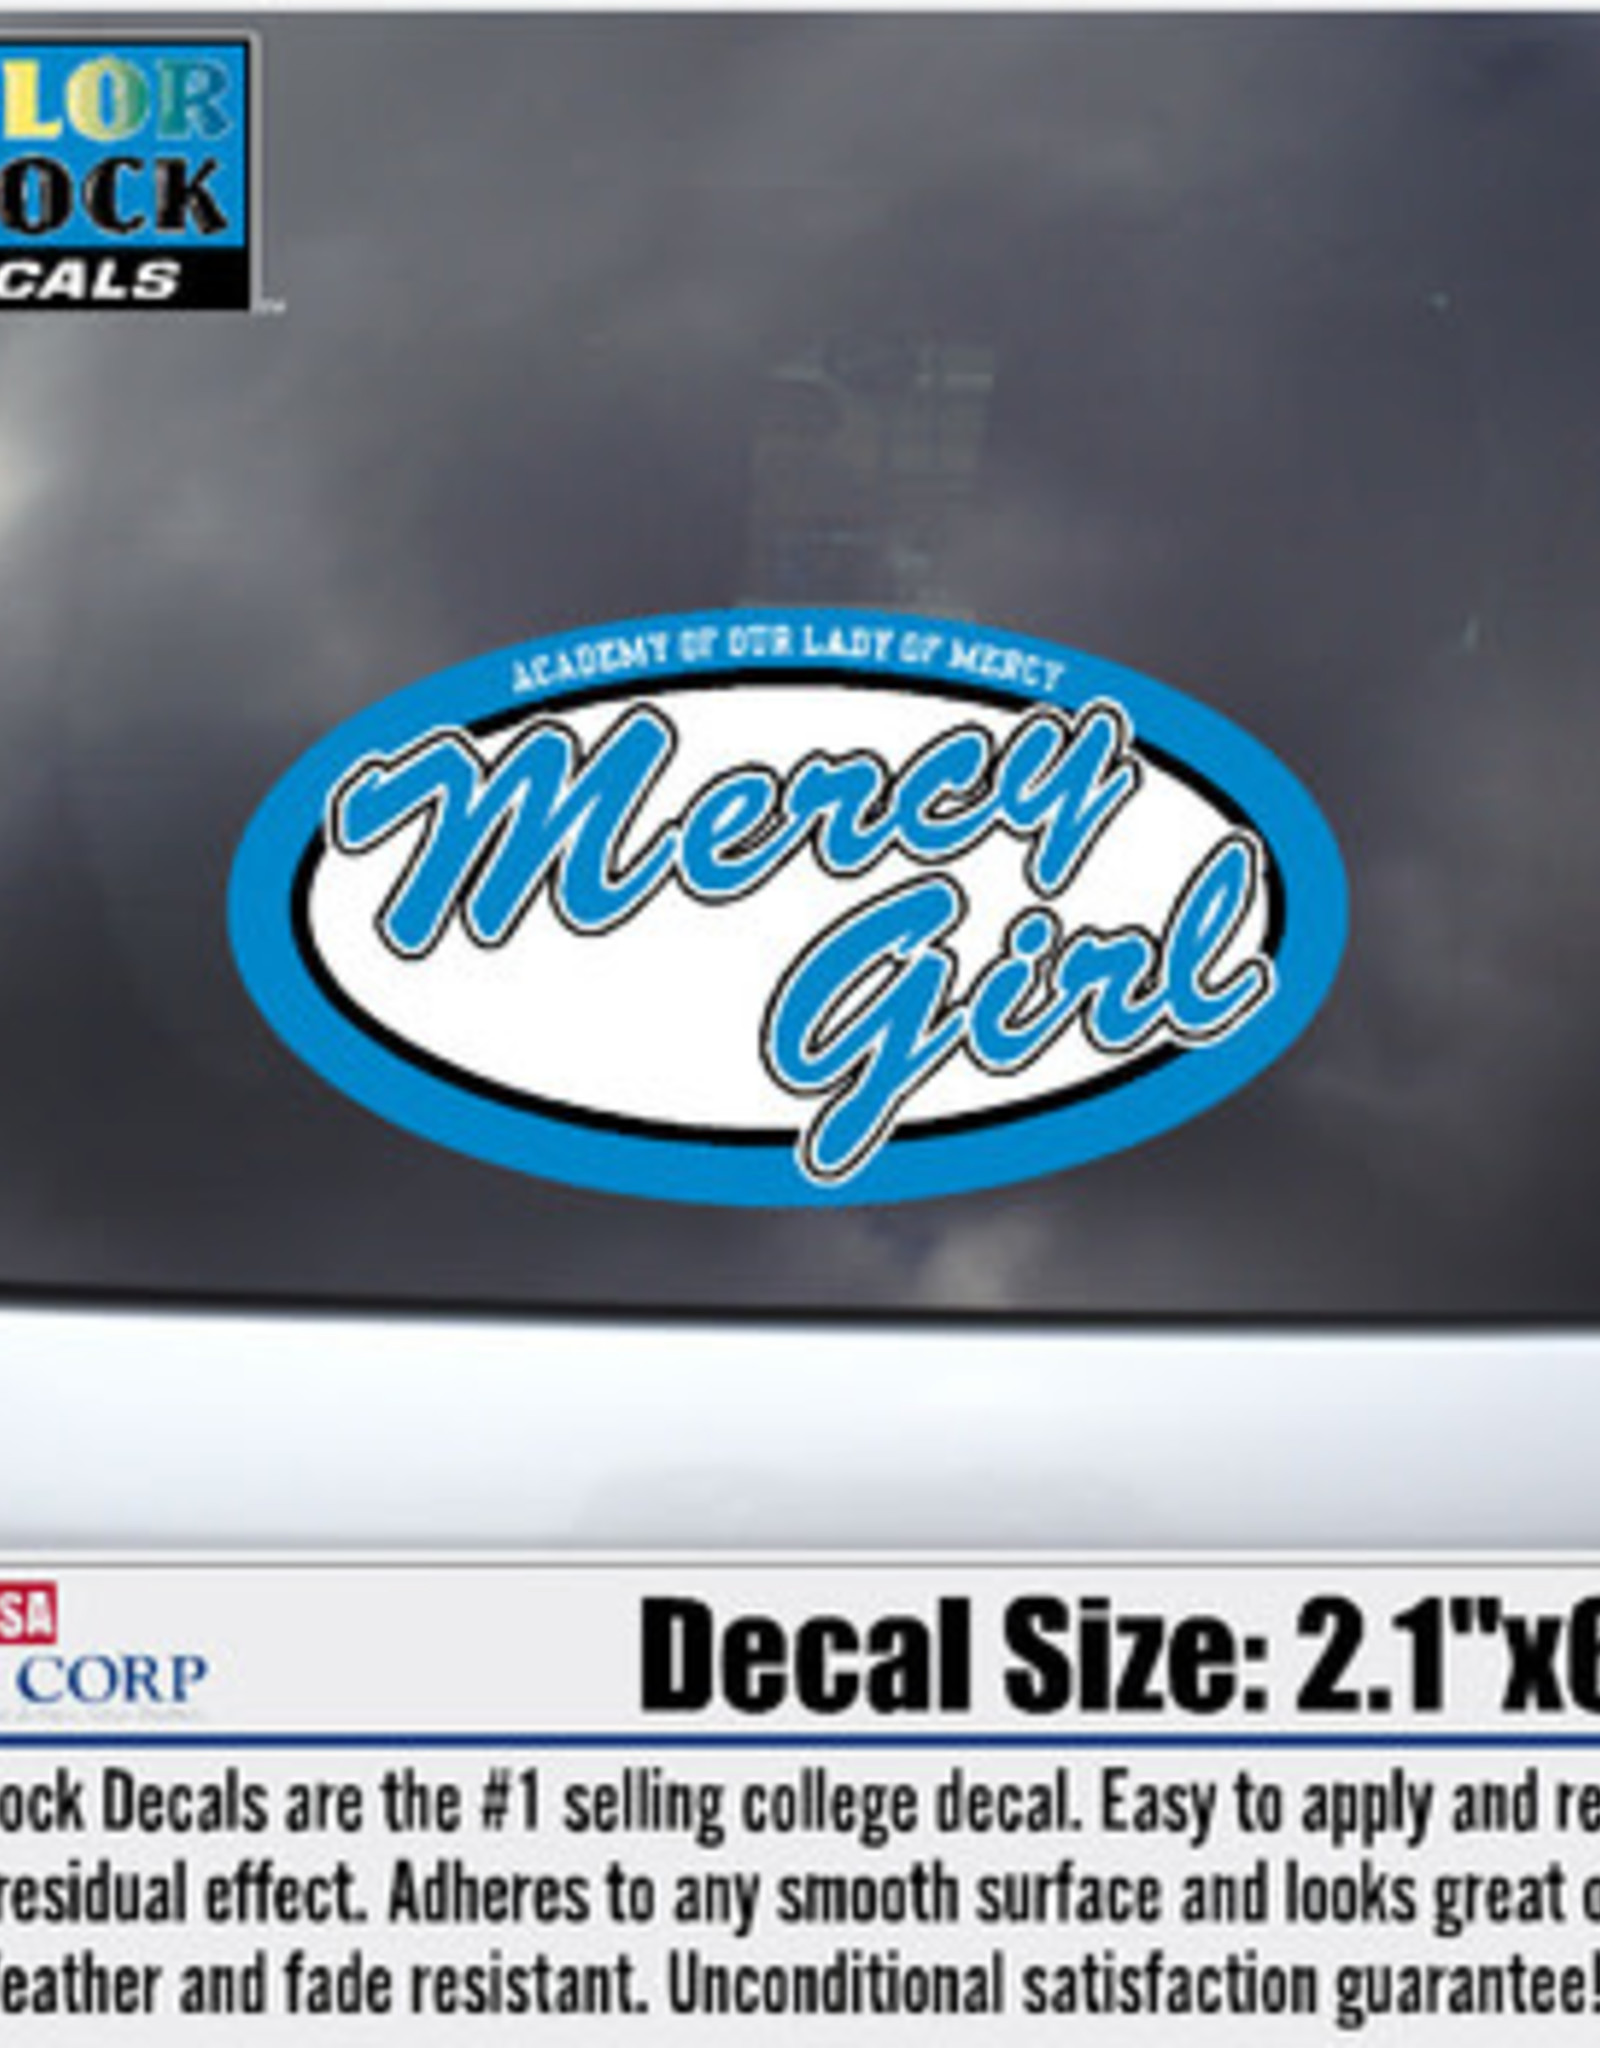 Color Shock "Mercy Girl" - Decal